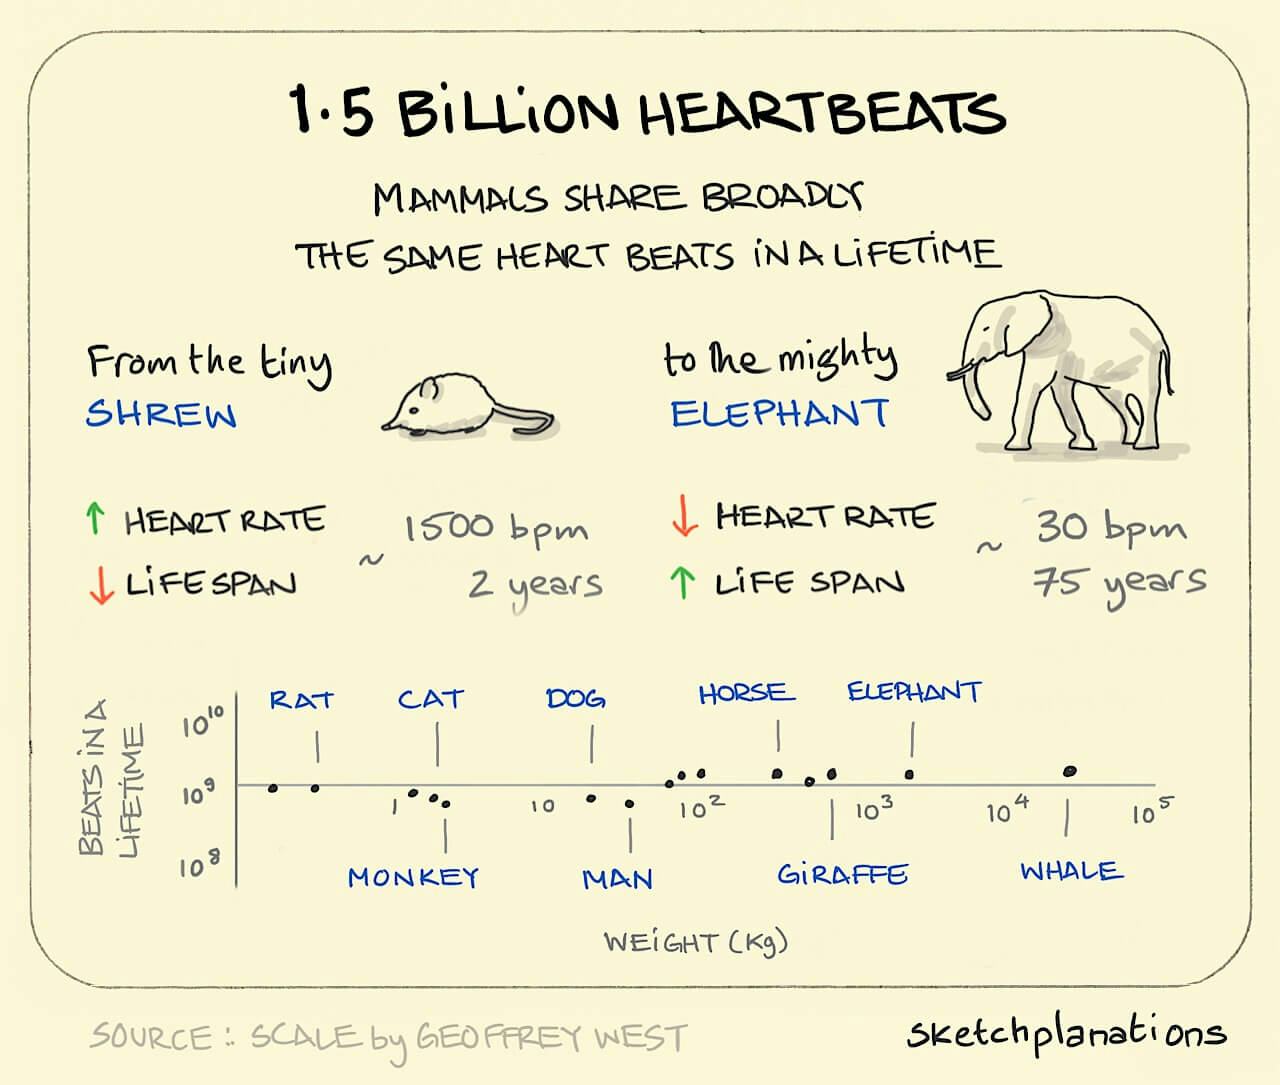 1.5 billion heartbeats illustration: showing how mammals share broadly the same number of heartbeats from a shrew to an elephant